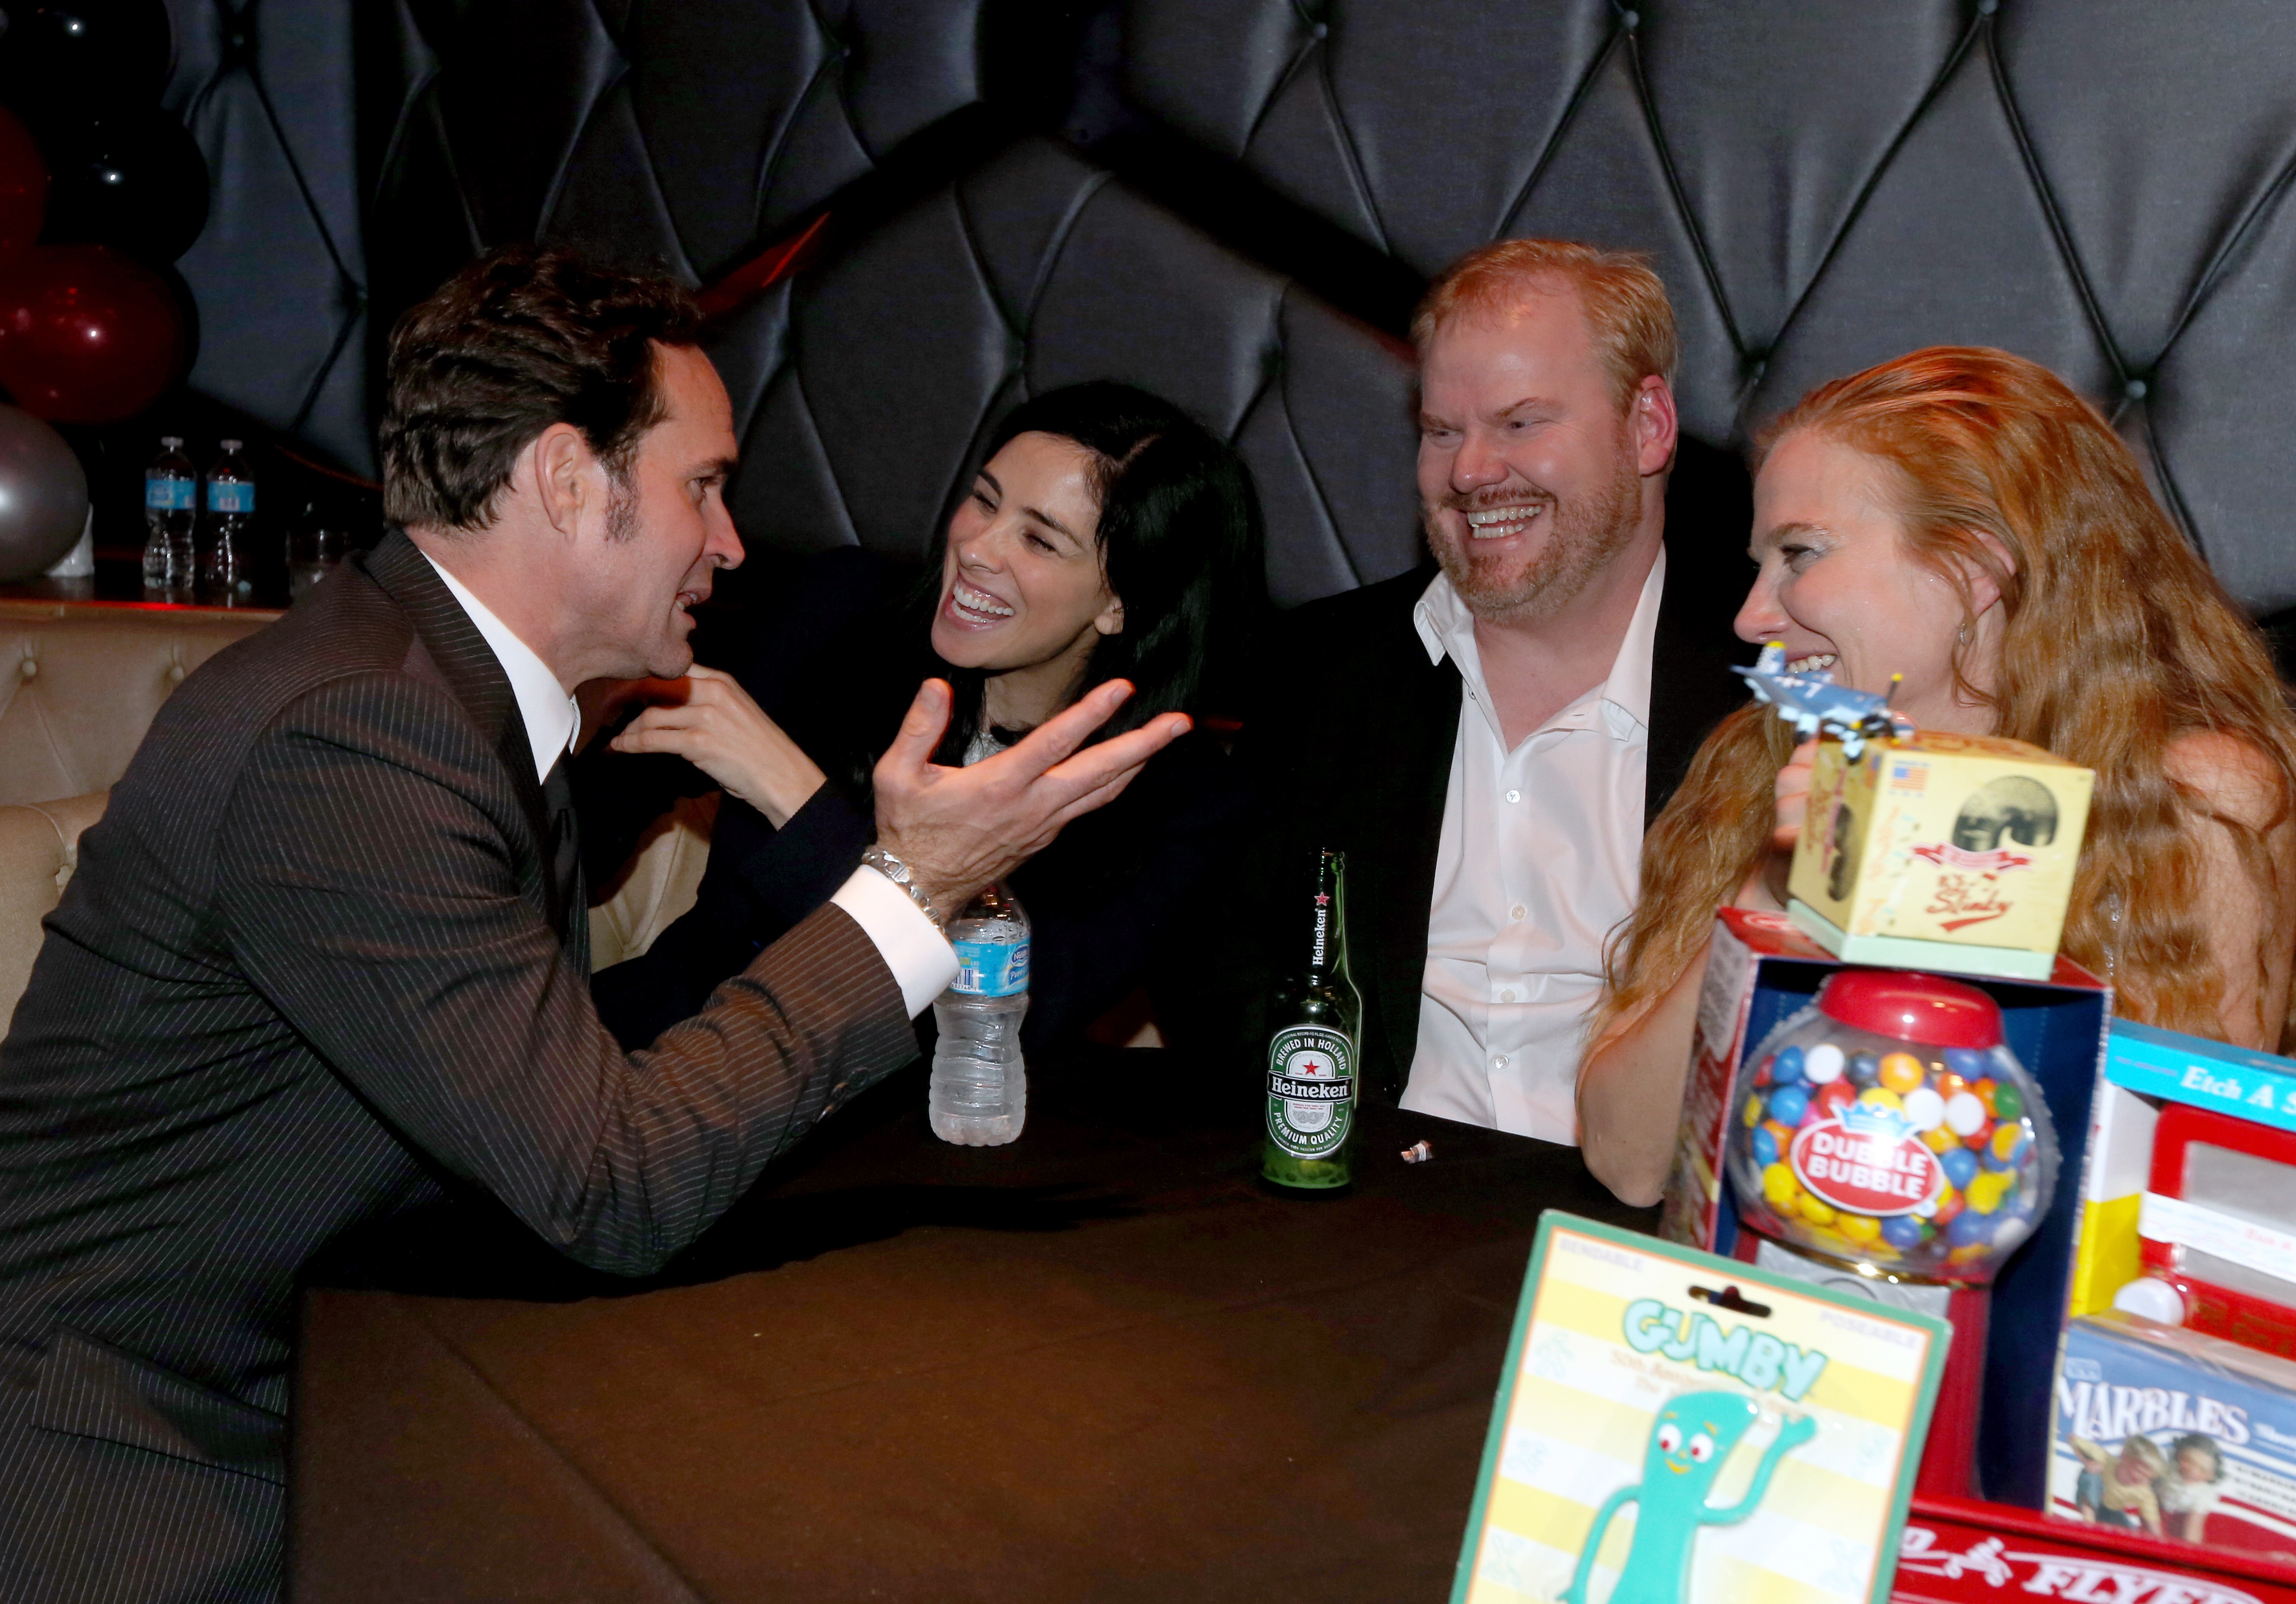 WEST HOLLYWOOD, CA - NOVEMBER 13: (L-R) "Stand Up For Gus" founder Jason Patric, comedian Sarah Silverman actors Jim Gaffigan and Jeannie Gaffigan attend the "Stand Up For Gus" Benefit at Bootsy Bellows on November 13, 2013 in West Hollywood, California.  (Photo by Christopher Polk/Getty Images for SUFG)